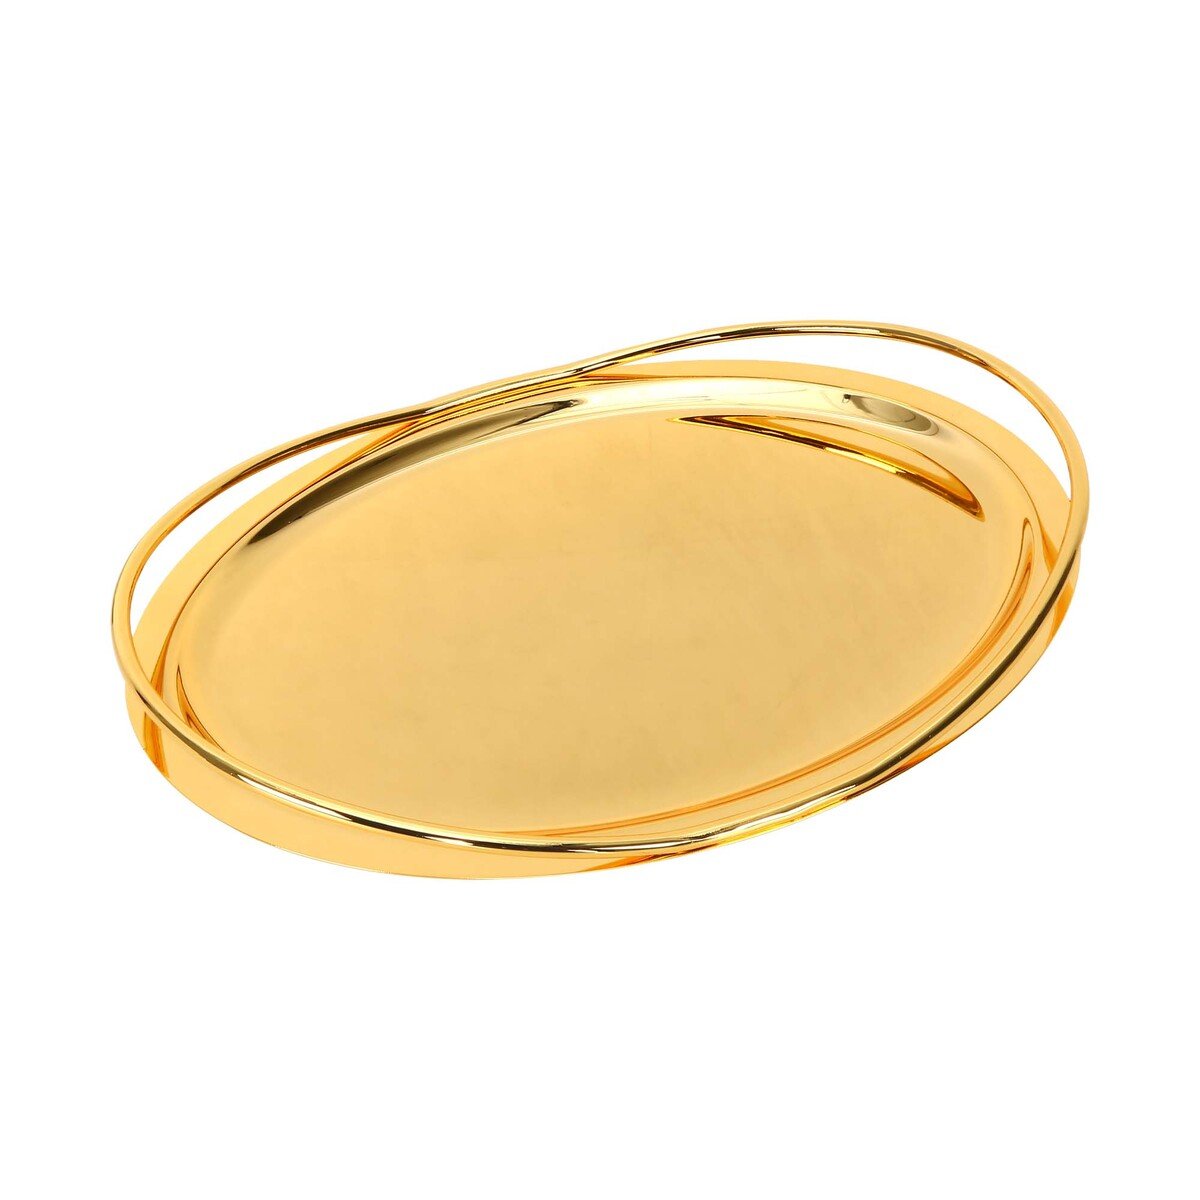 Chefline Oval Tray With Handle RGK936N3 Gold